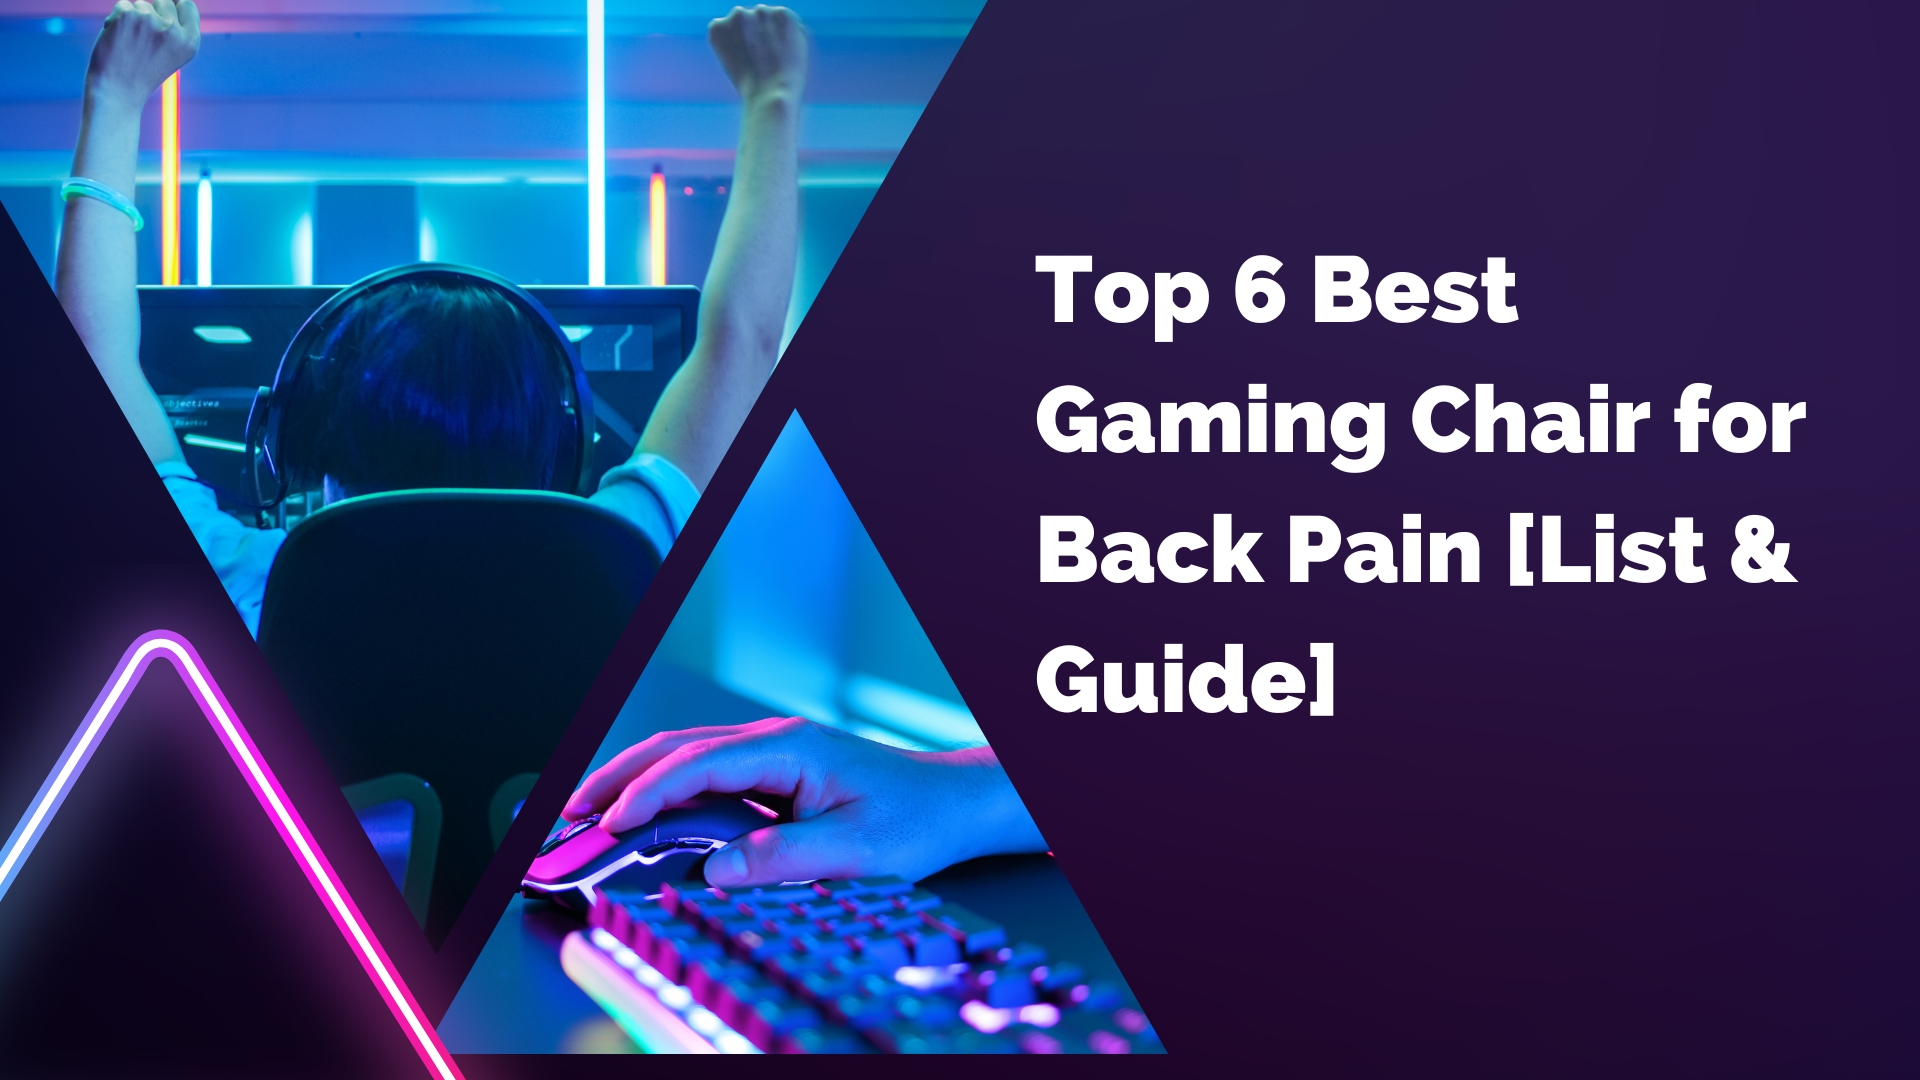 Top 6 Best Gaming Chair for Back Pain [List & Guide]